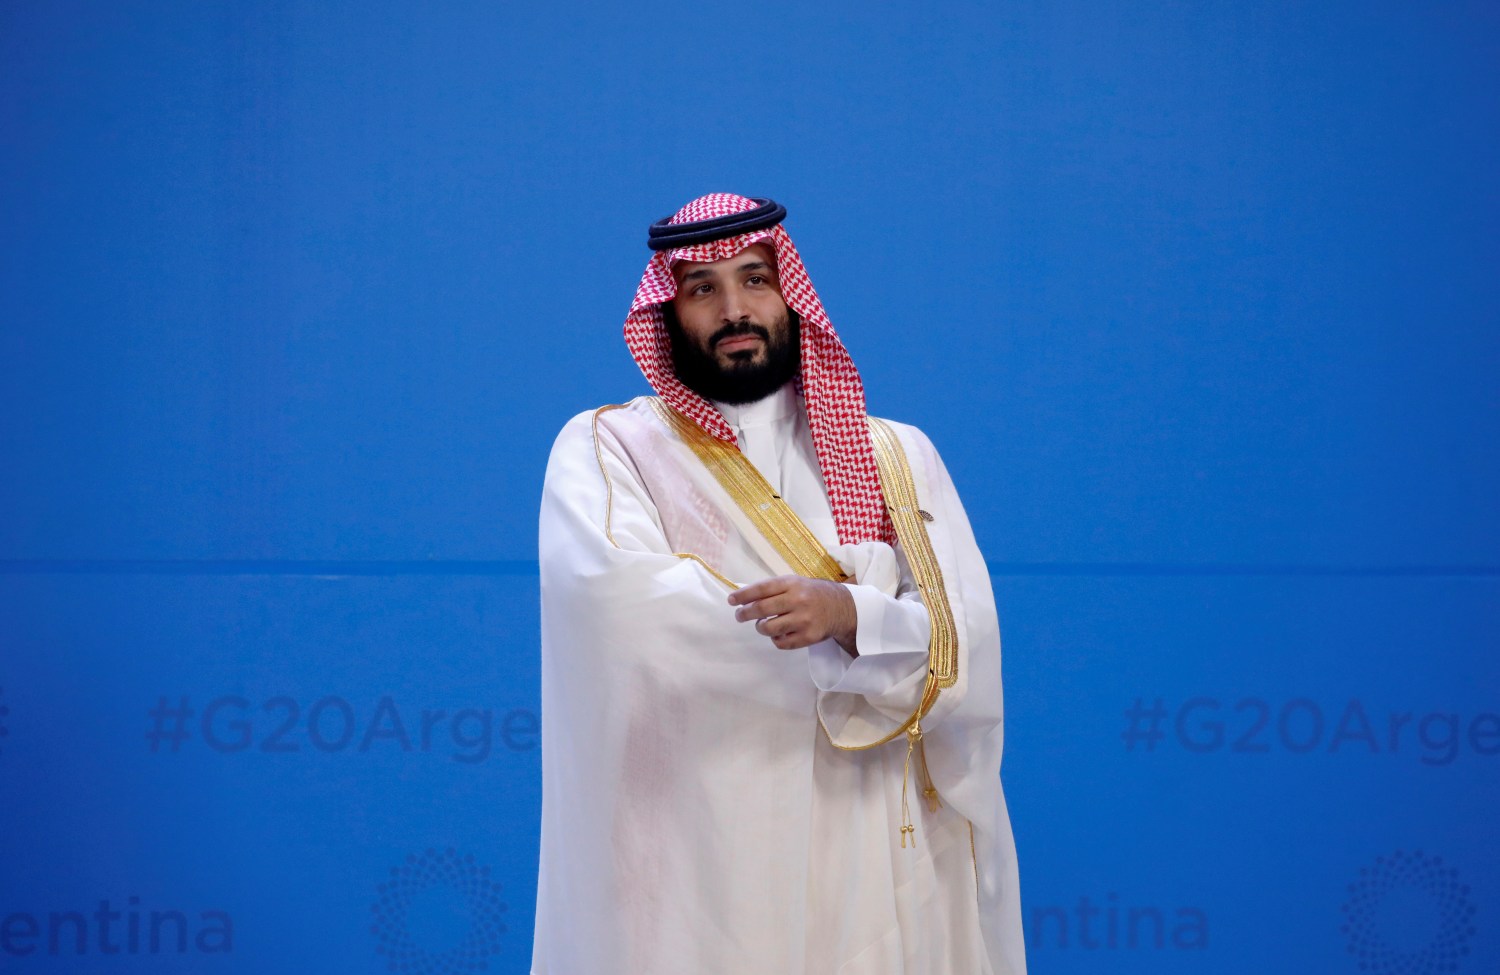 Saudi Arabia's Crown Prince Mohammed bin Salman waits for the family photo during the G20 summit in Buenos Aires, Argentina November 30, 2018. REUTERS/Andres Martinez Casares/Pool     TPX IMAGES OF THE DAY - RC149554C0C0